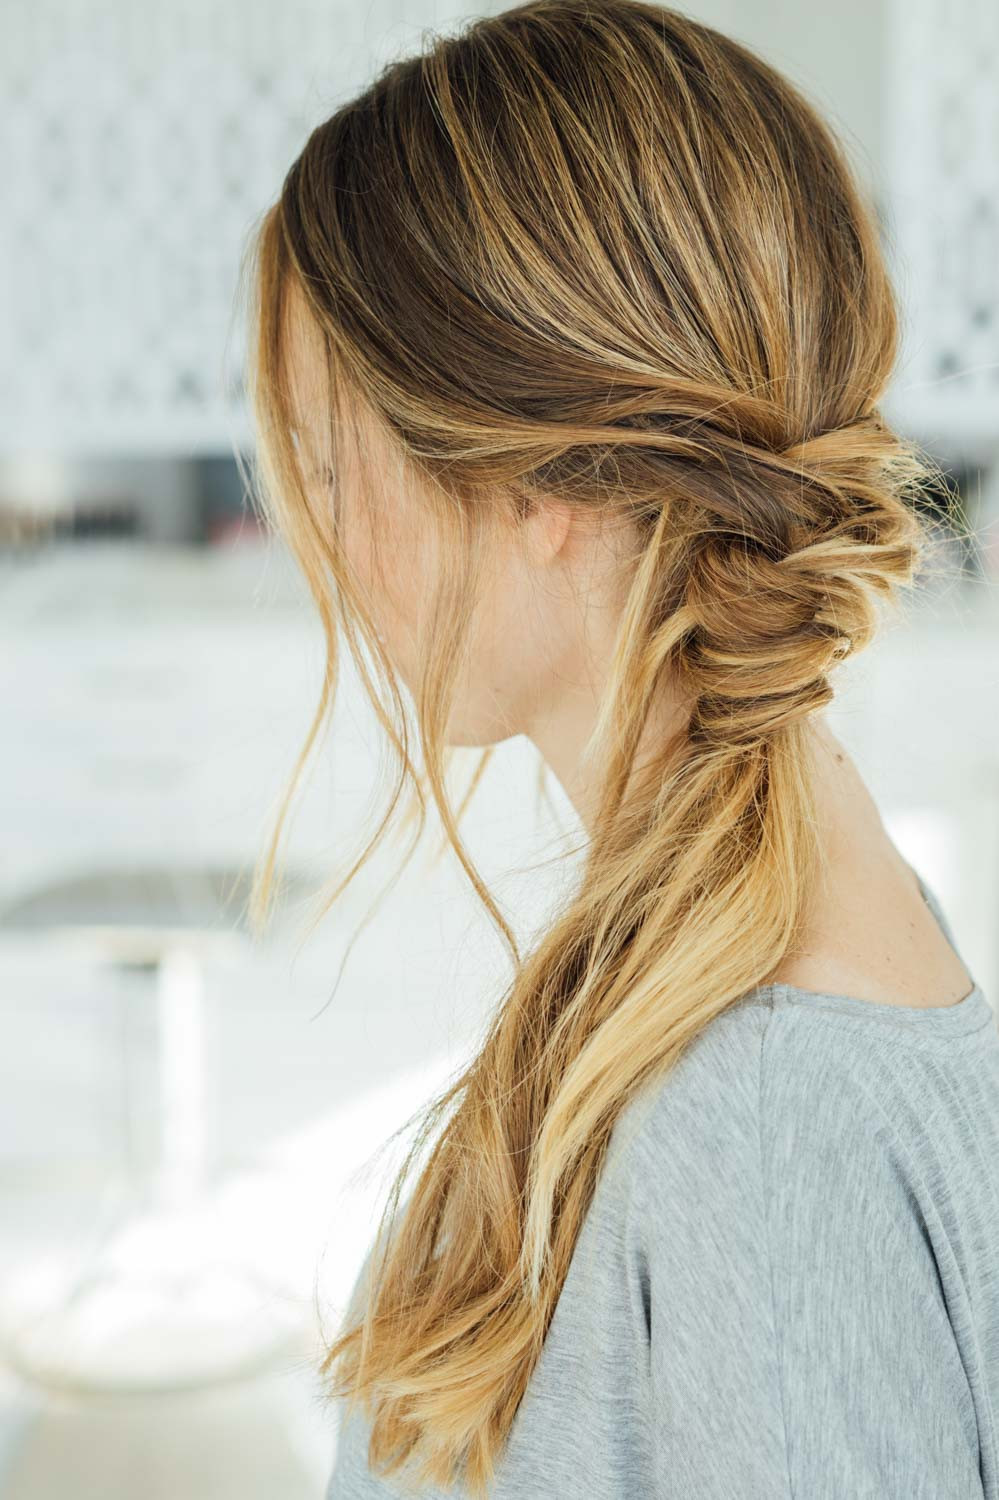 Cute Hairstyles That Are Easy
 16 Easy Hairstyles for Hot Summer Days